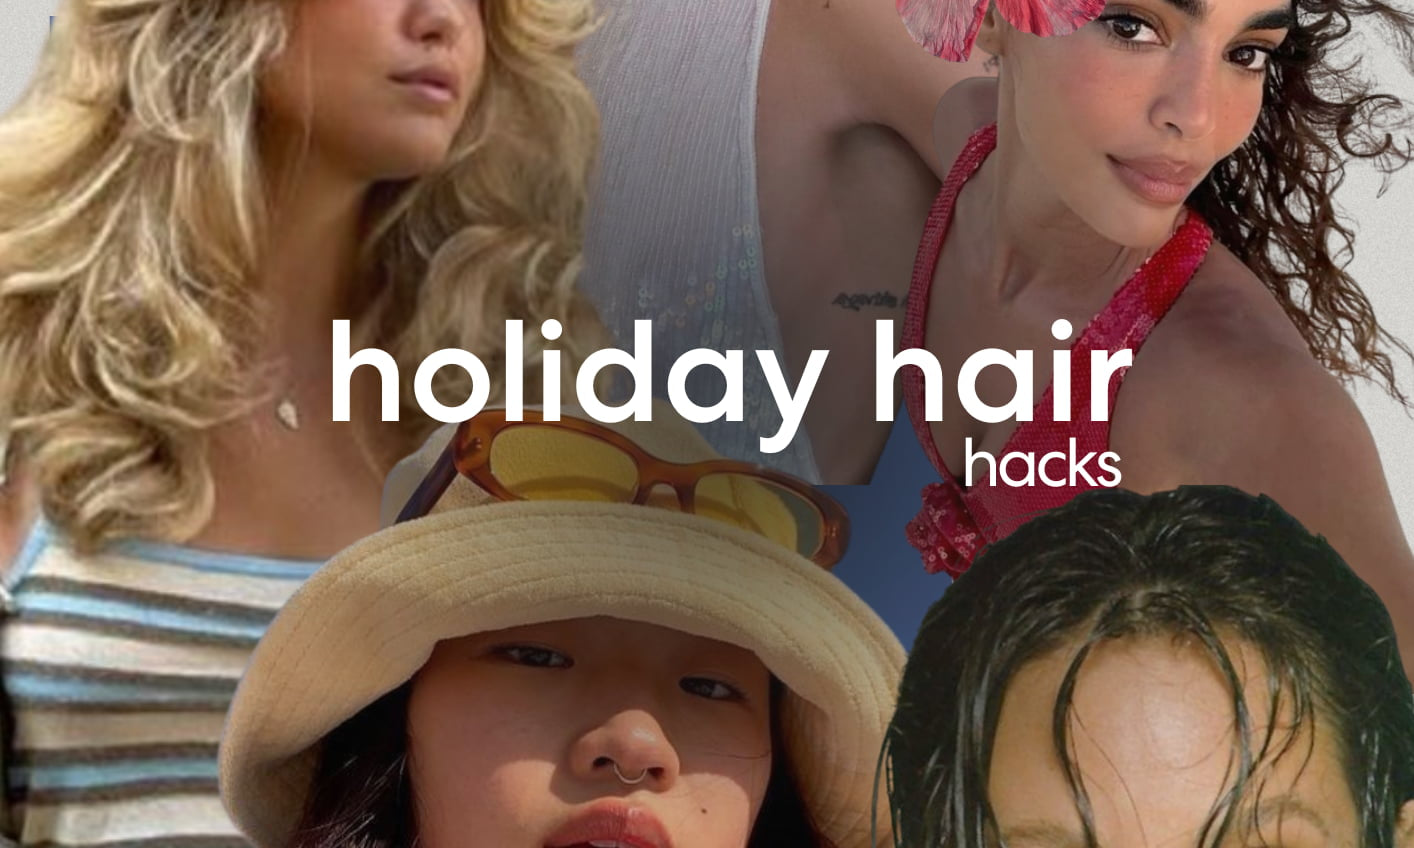 6 Easy Ways To Protect Your Hair On Holiday